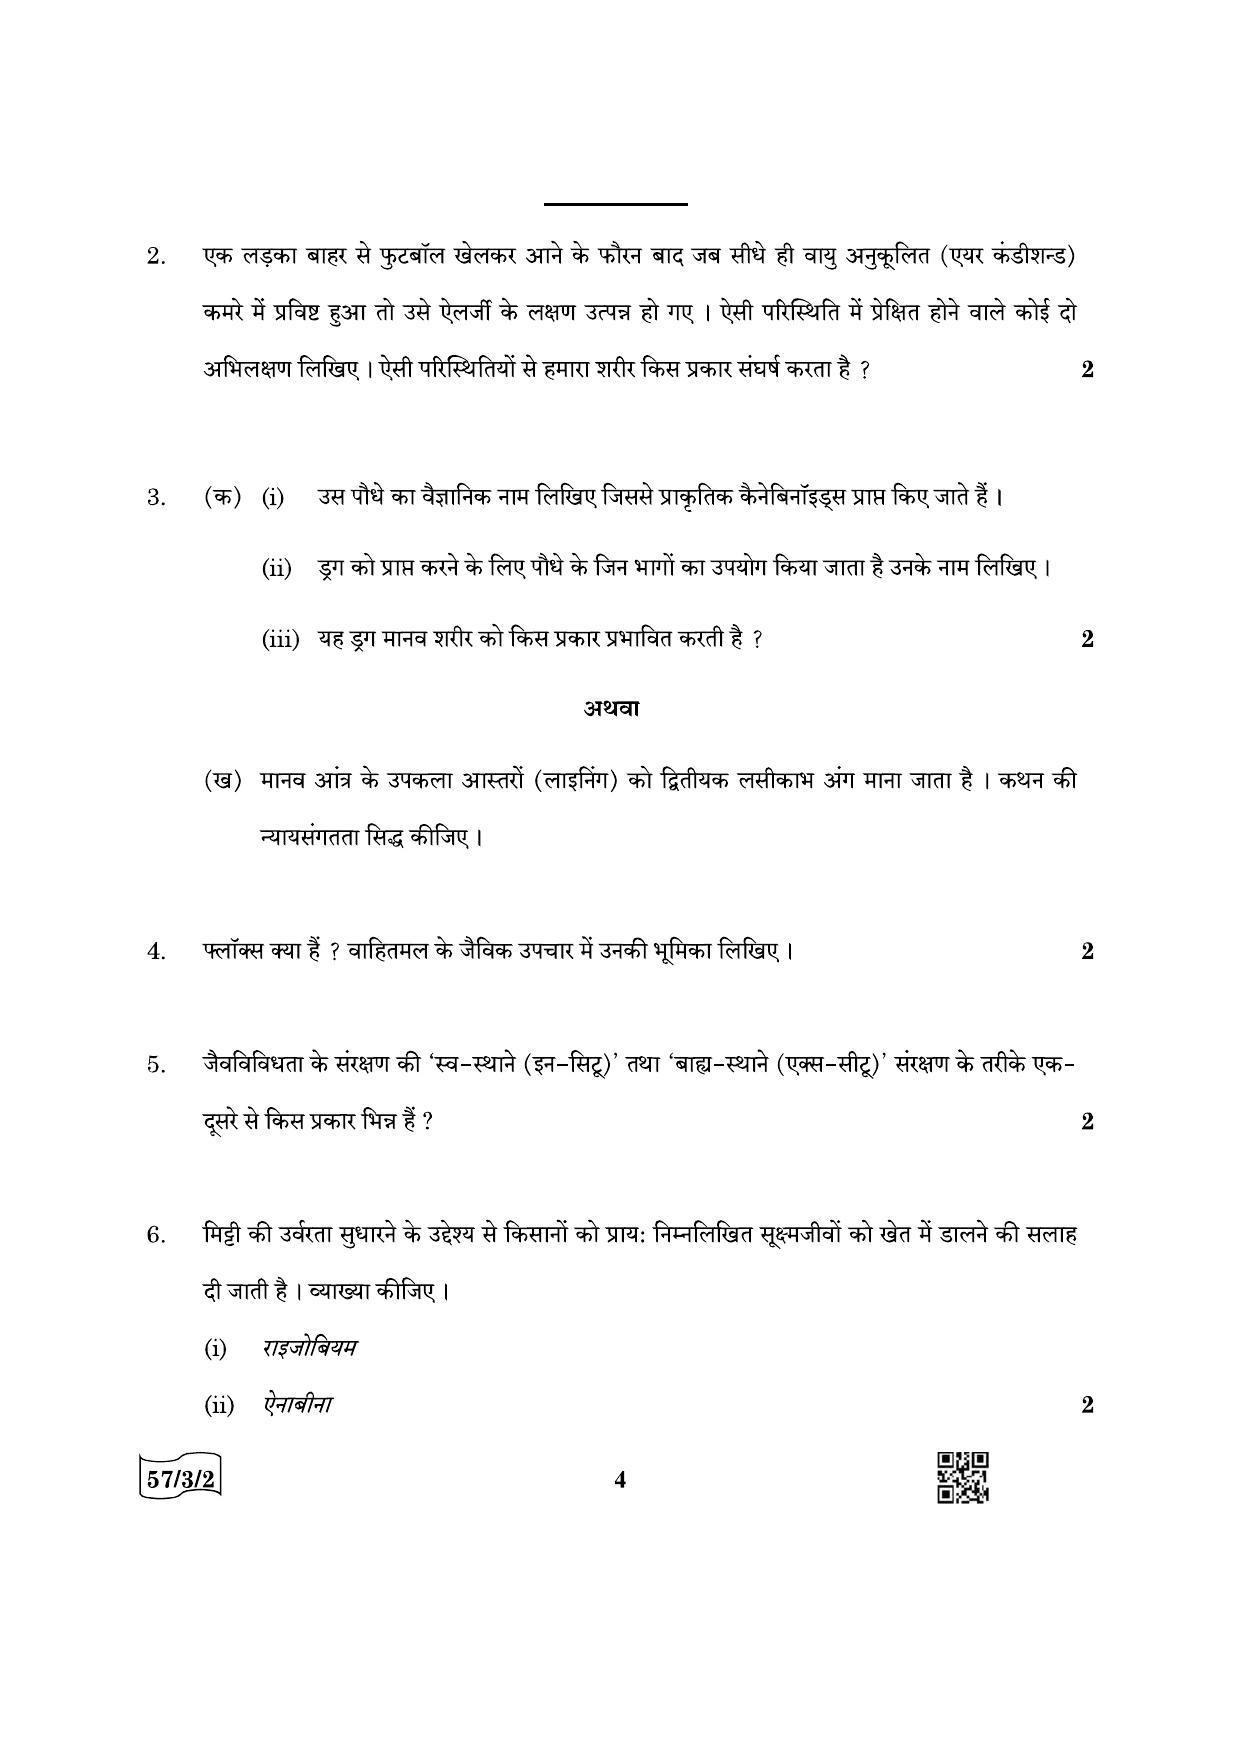 CBSE Class 12 57-3-2 Biology 2022 Question Paper - Page 4